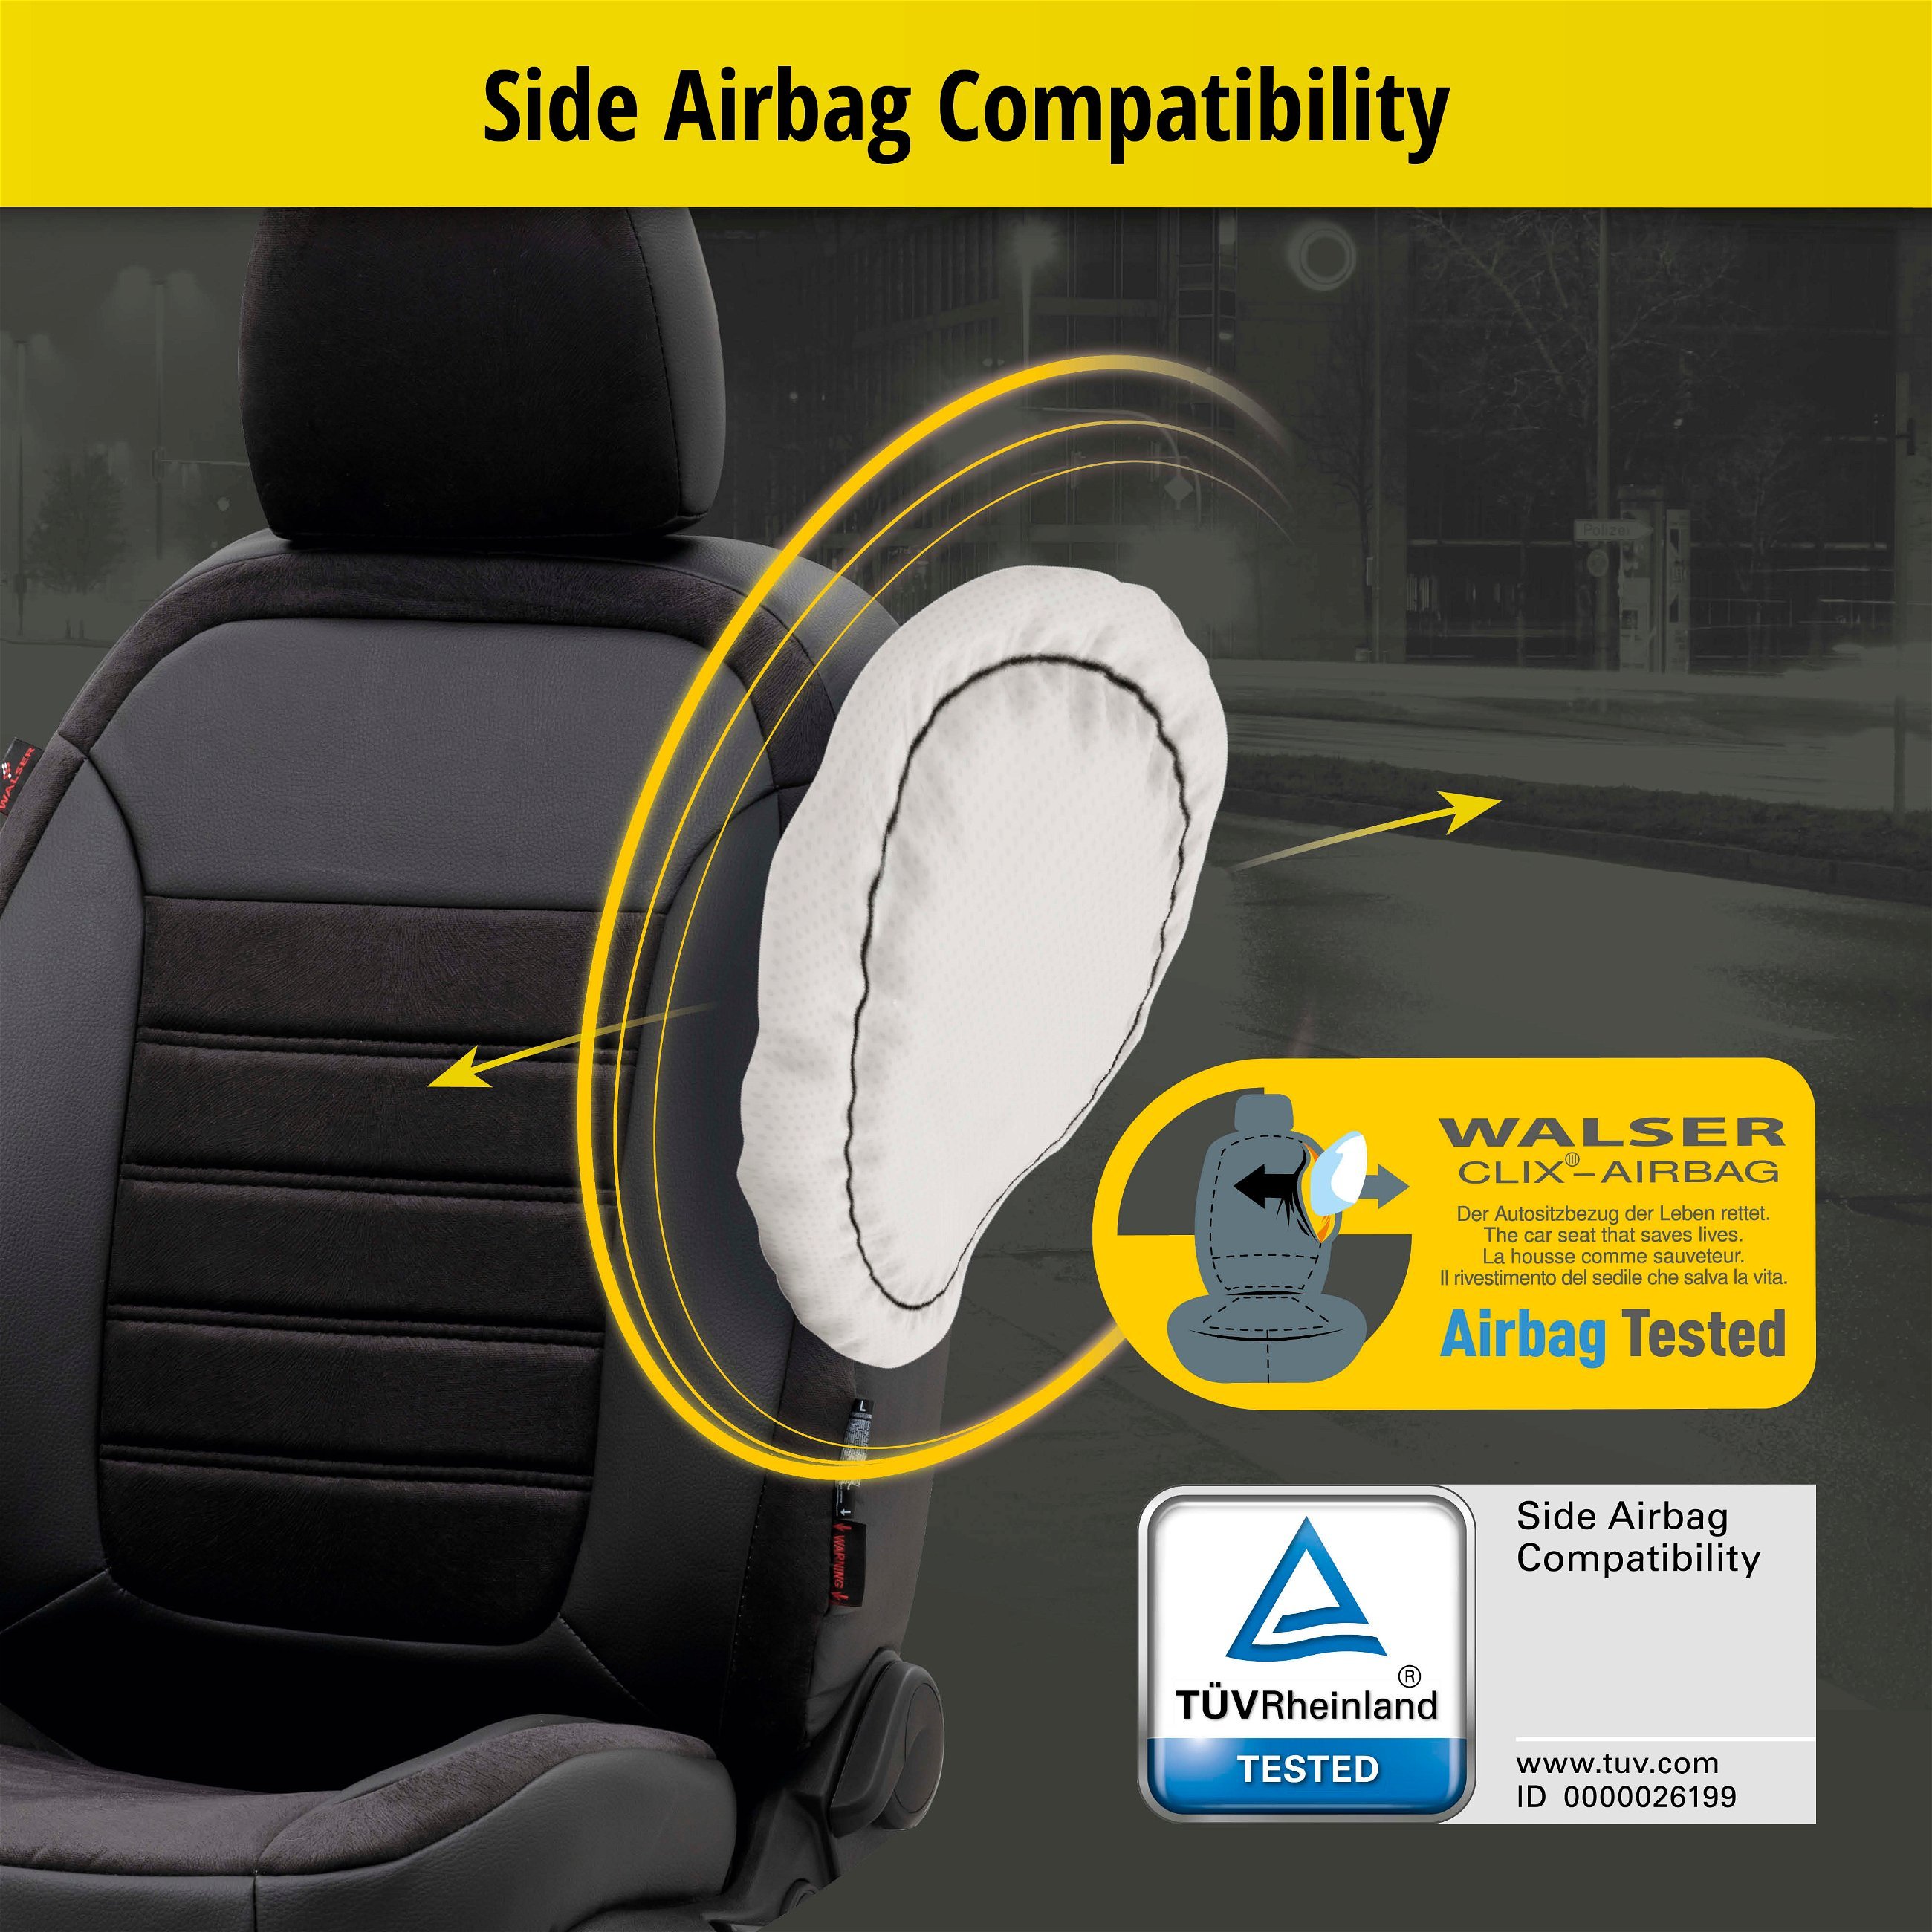 Seat Cover Bari for Nissan Qashqai II 11/2013-Today, 2 seat covers for normal seats